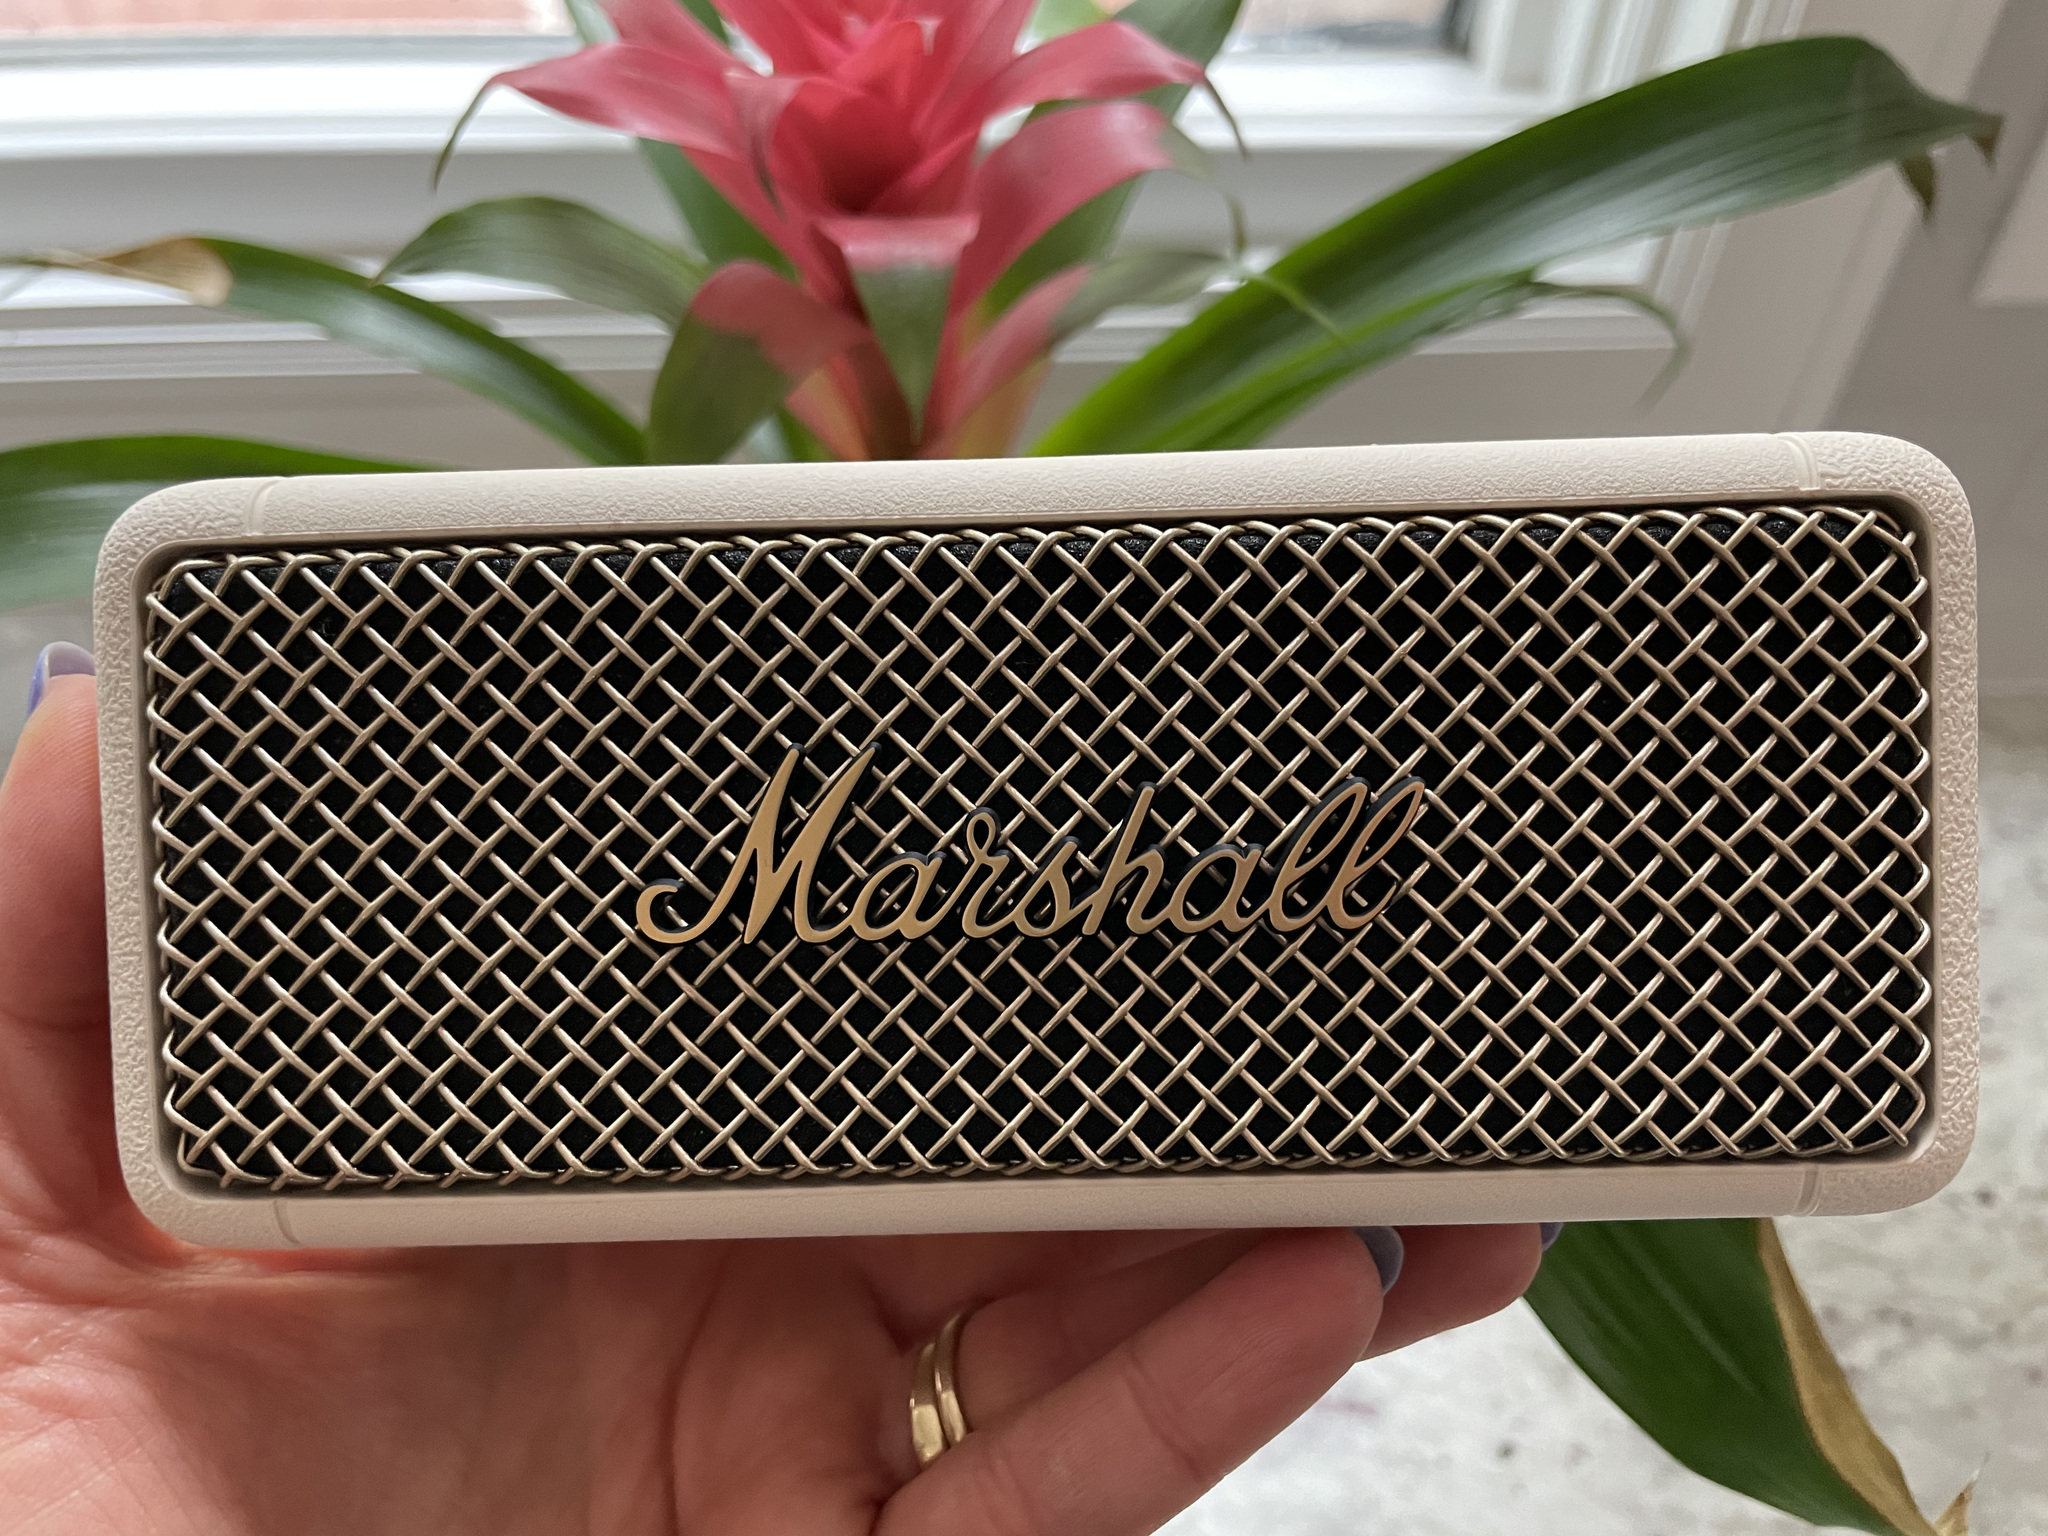 Marshall Emberton Speaker review: Packs quite a punch | iMore